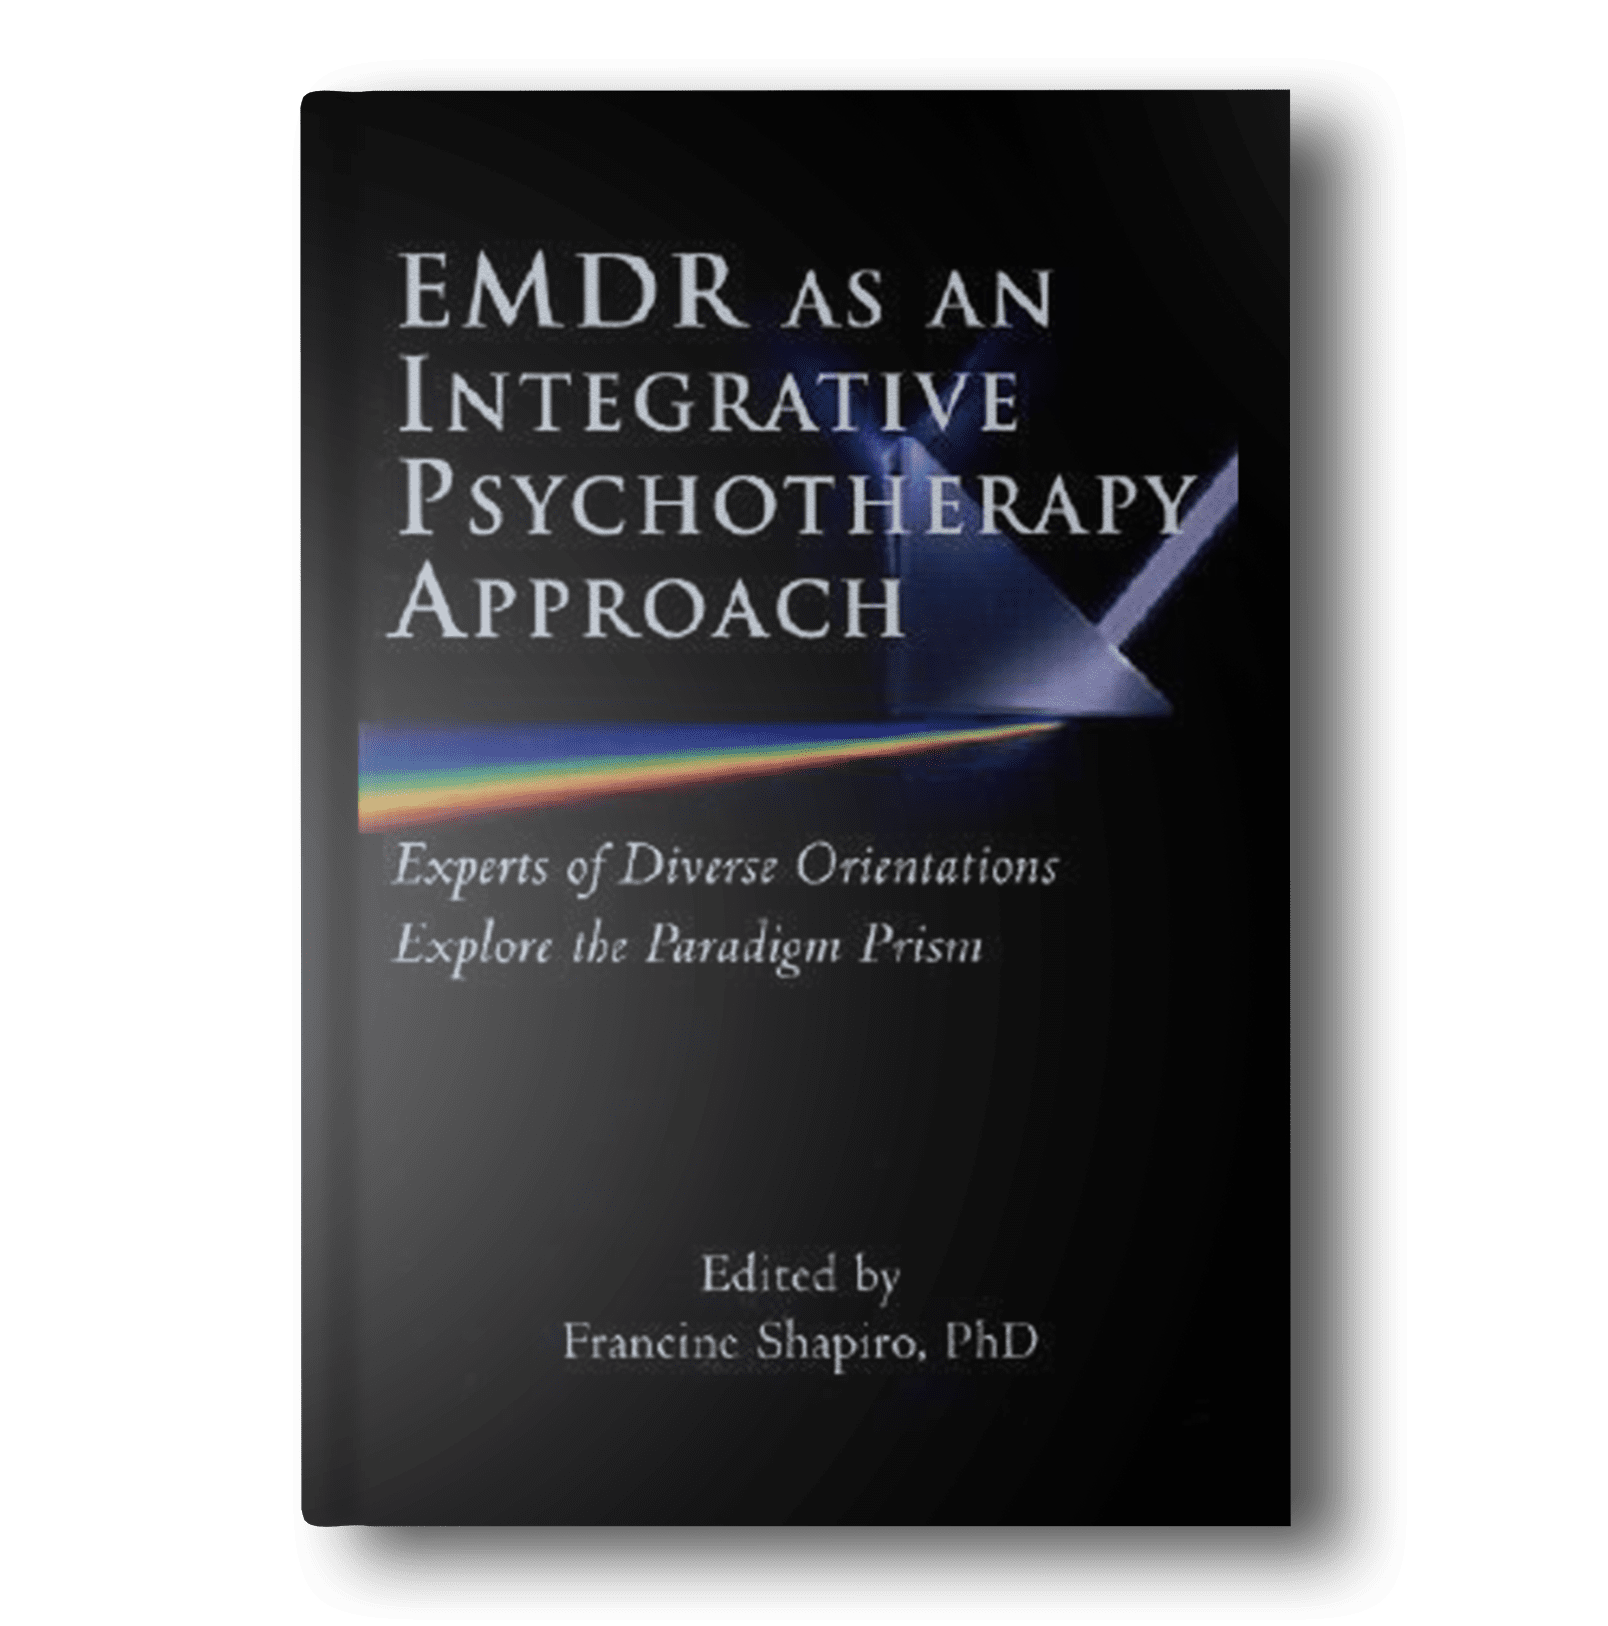 EMDR-as-an-Integrative-Psychotherapy-Approach